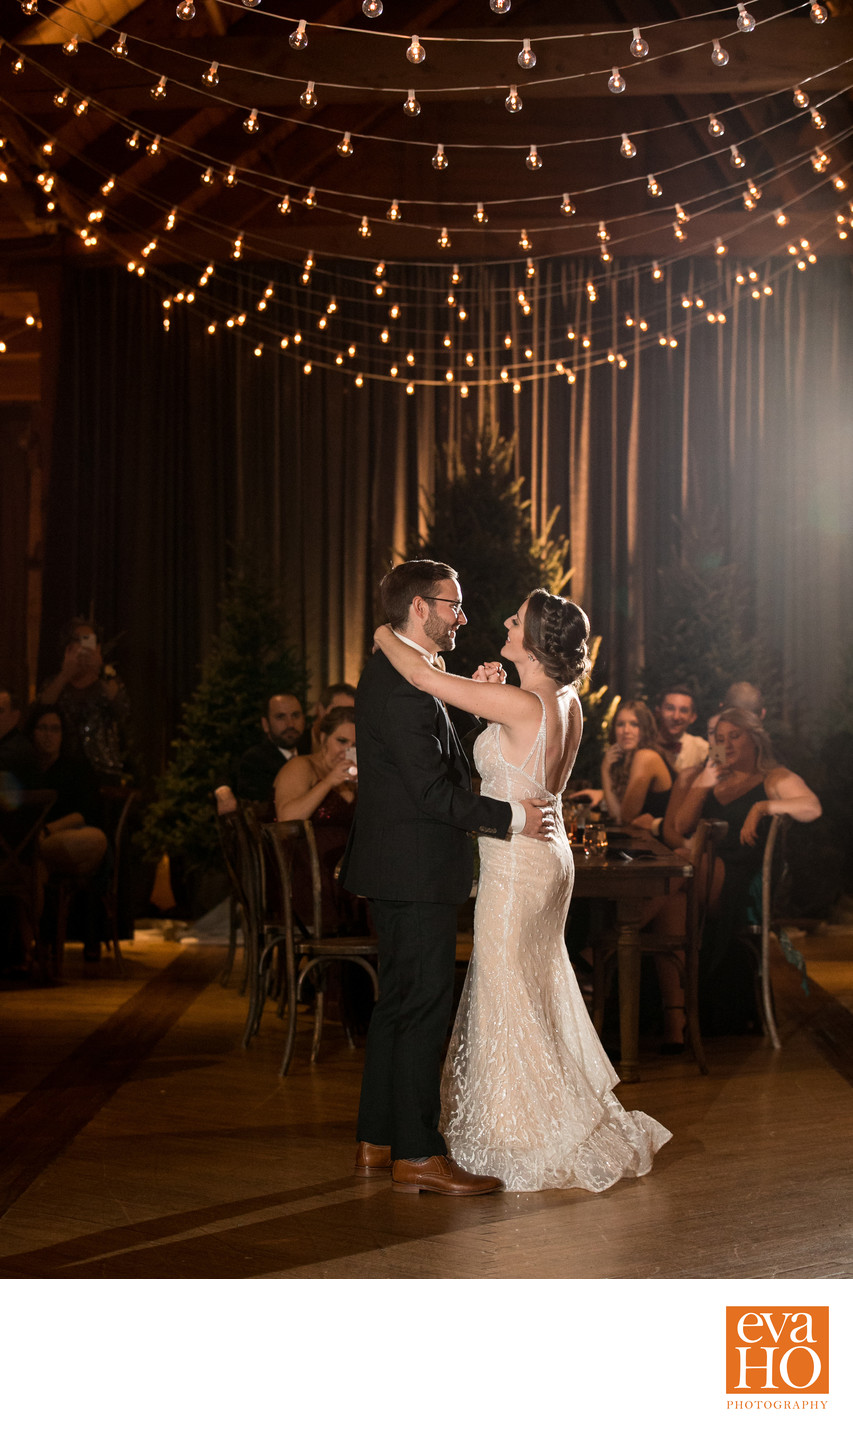 First Dance as husband and wife in front of their guests